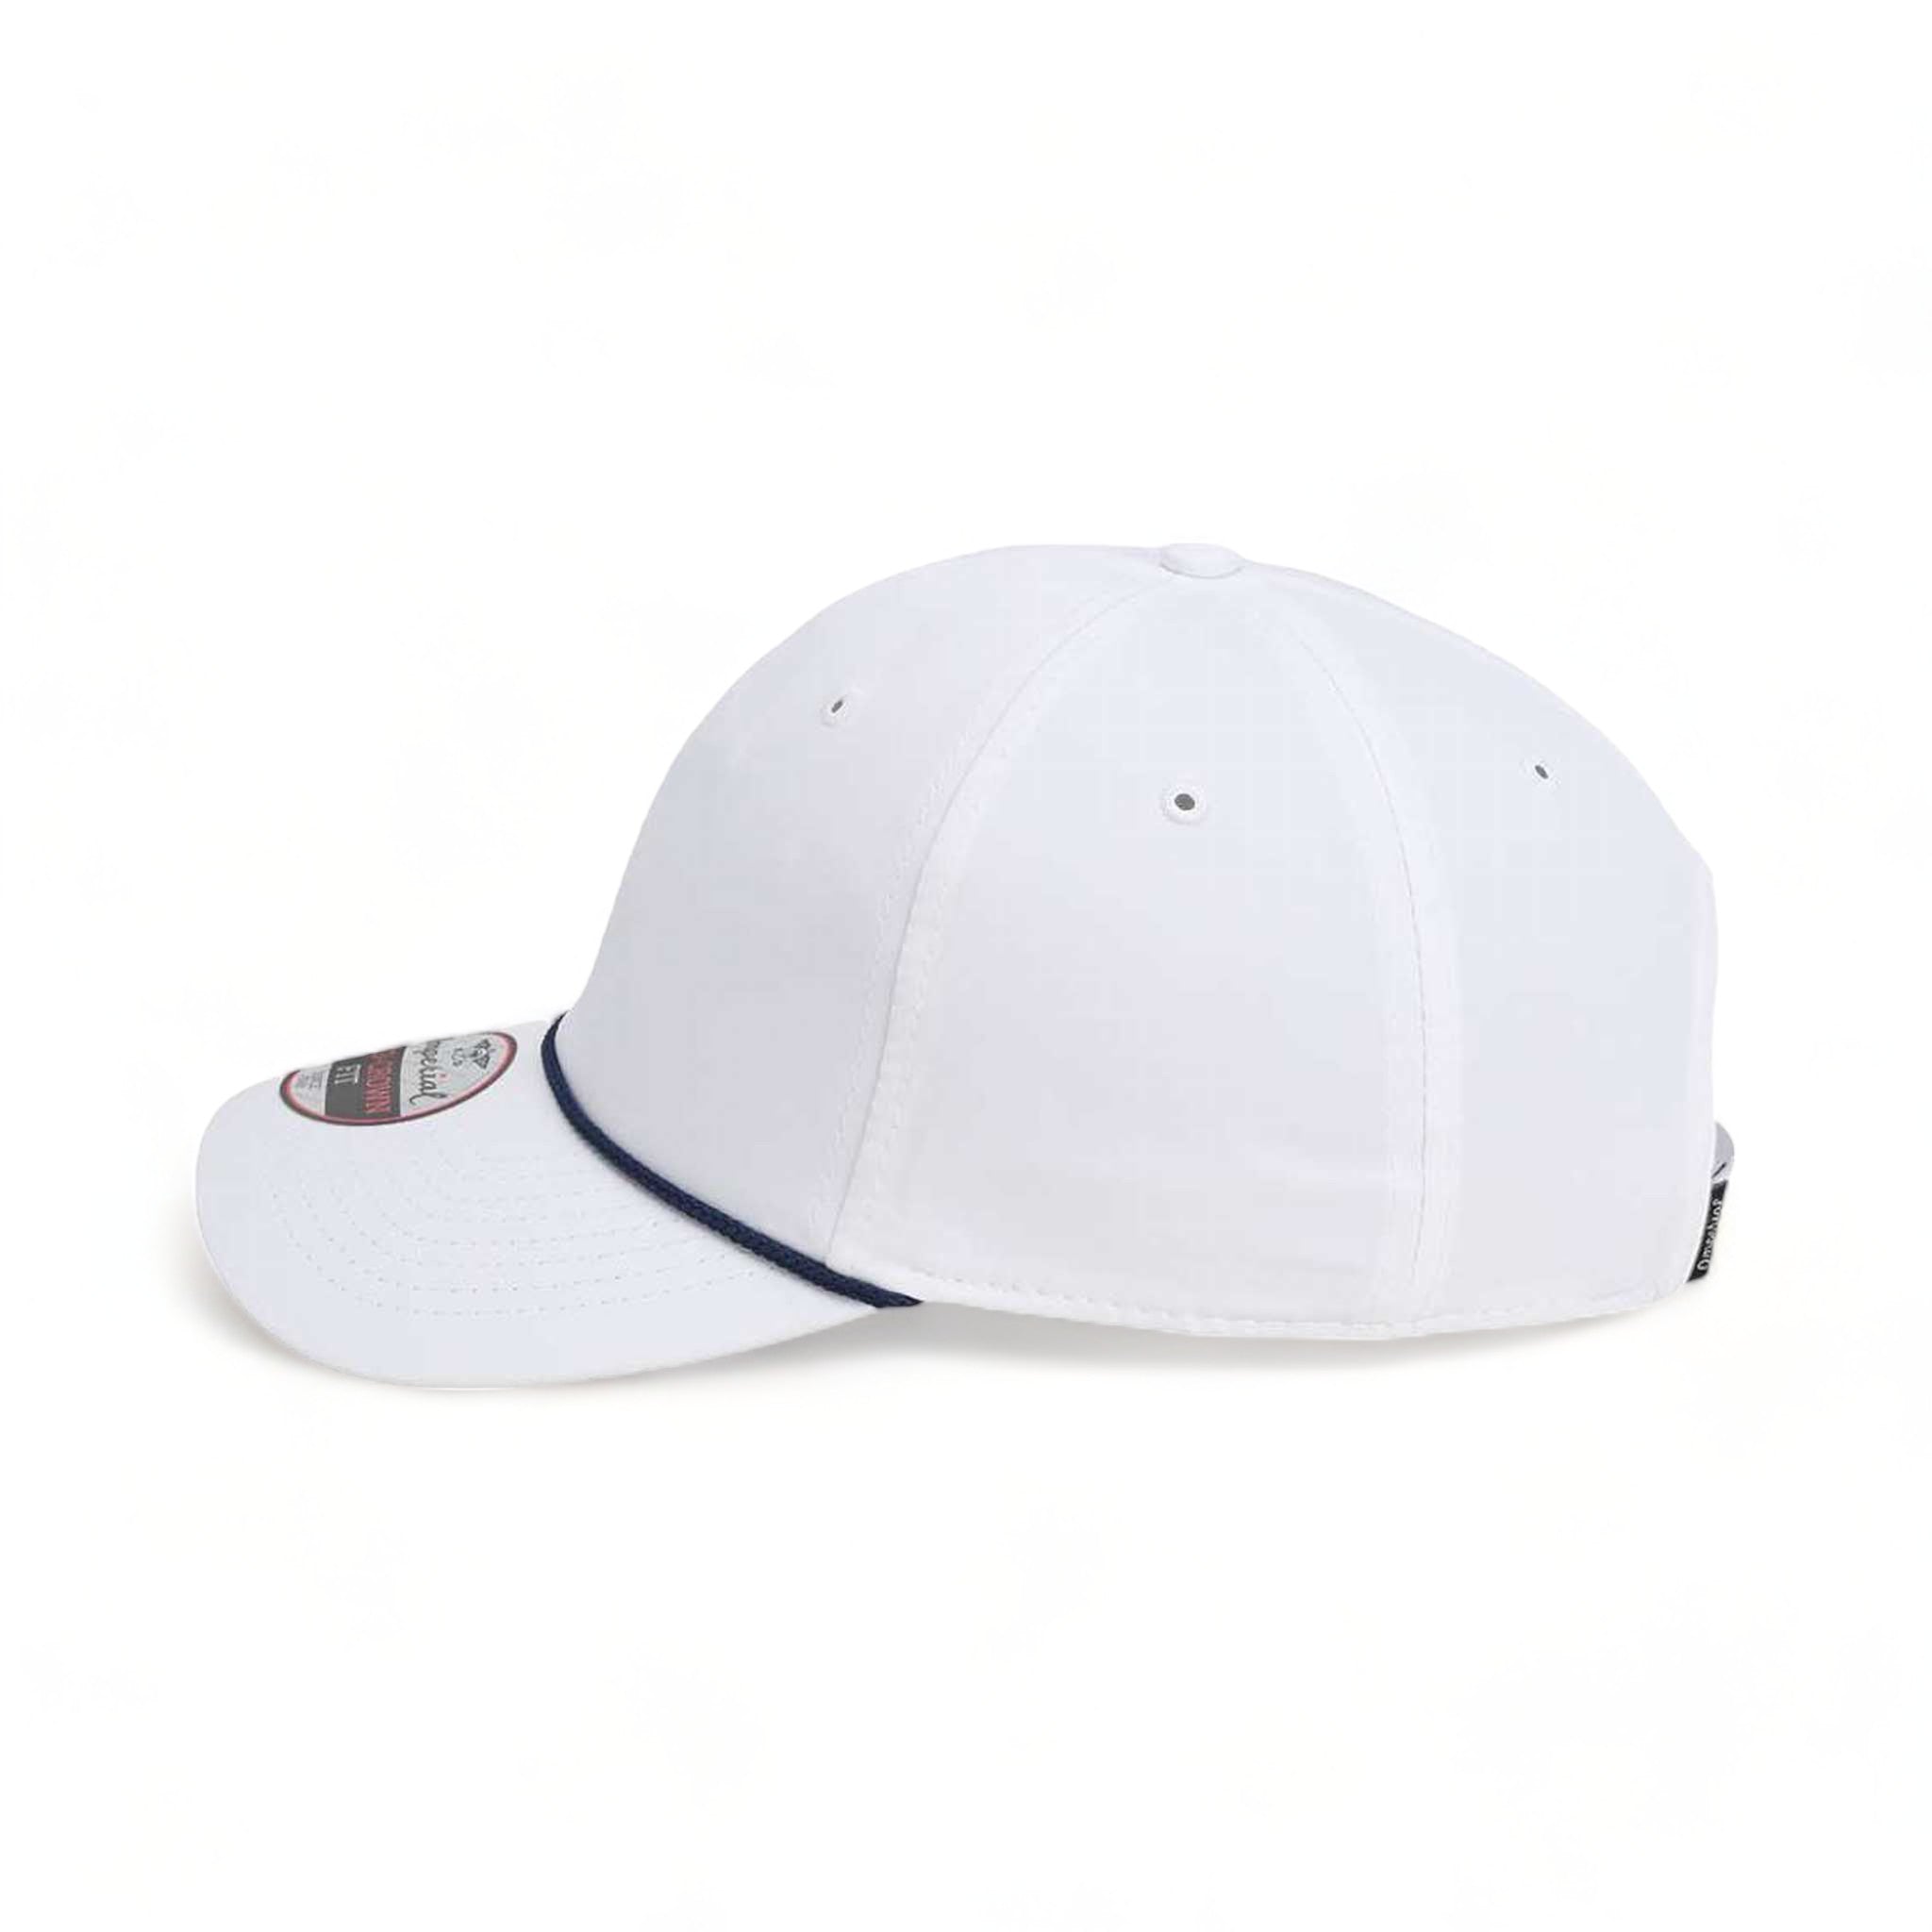 Side view of Imperial 7054 custom hat in white and navy